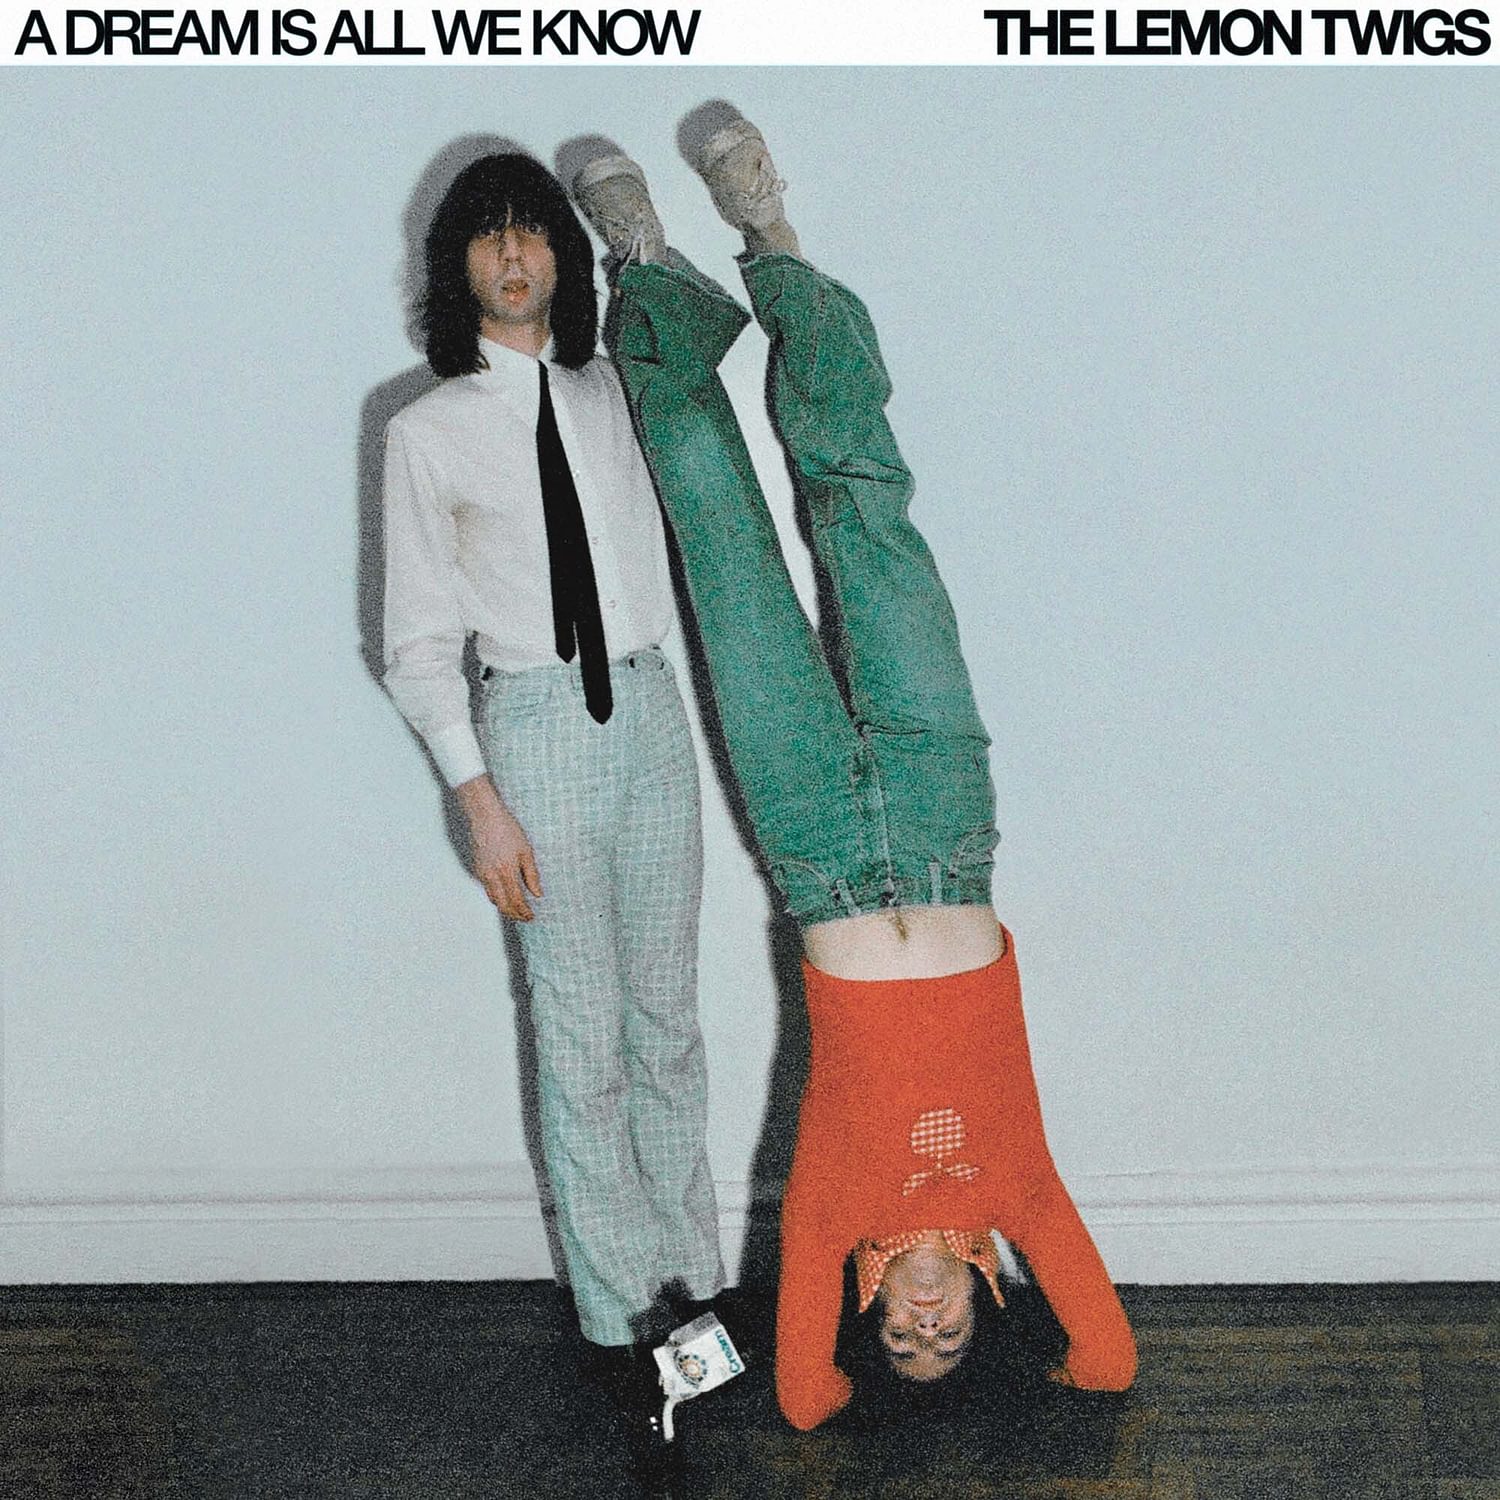 <p><strong>The Lemon Twigs</strong> - A Dream Is All We Know</p>